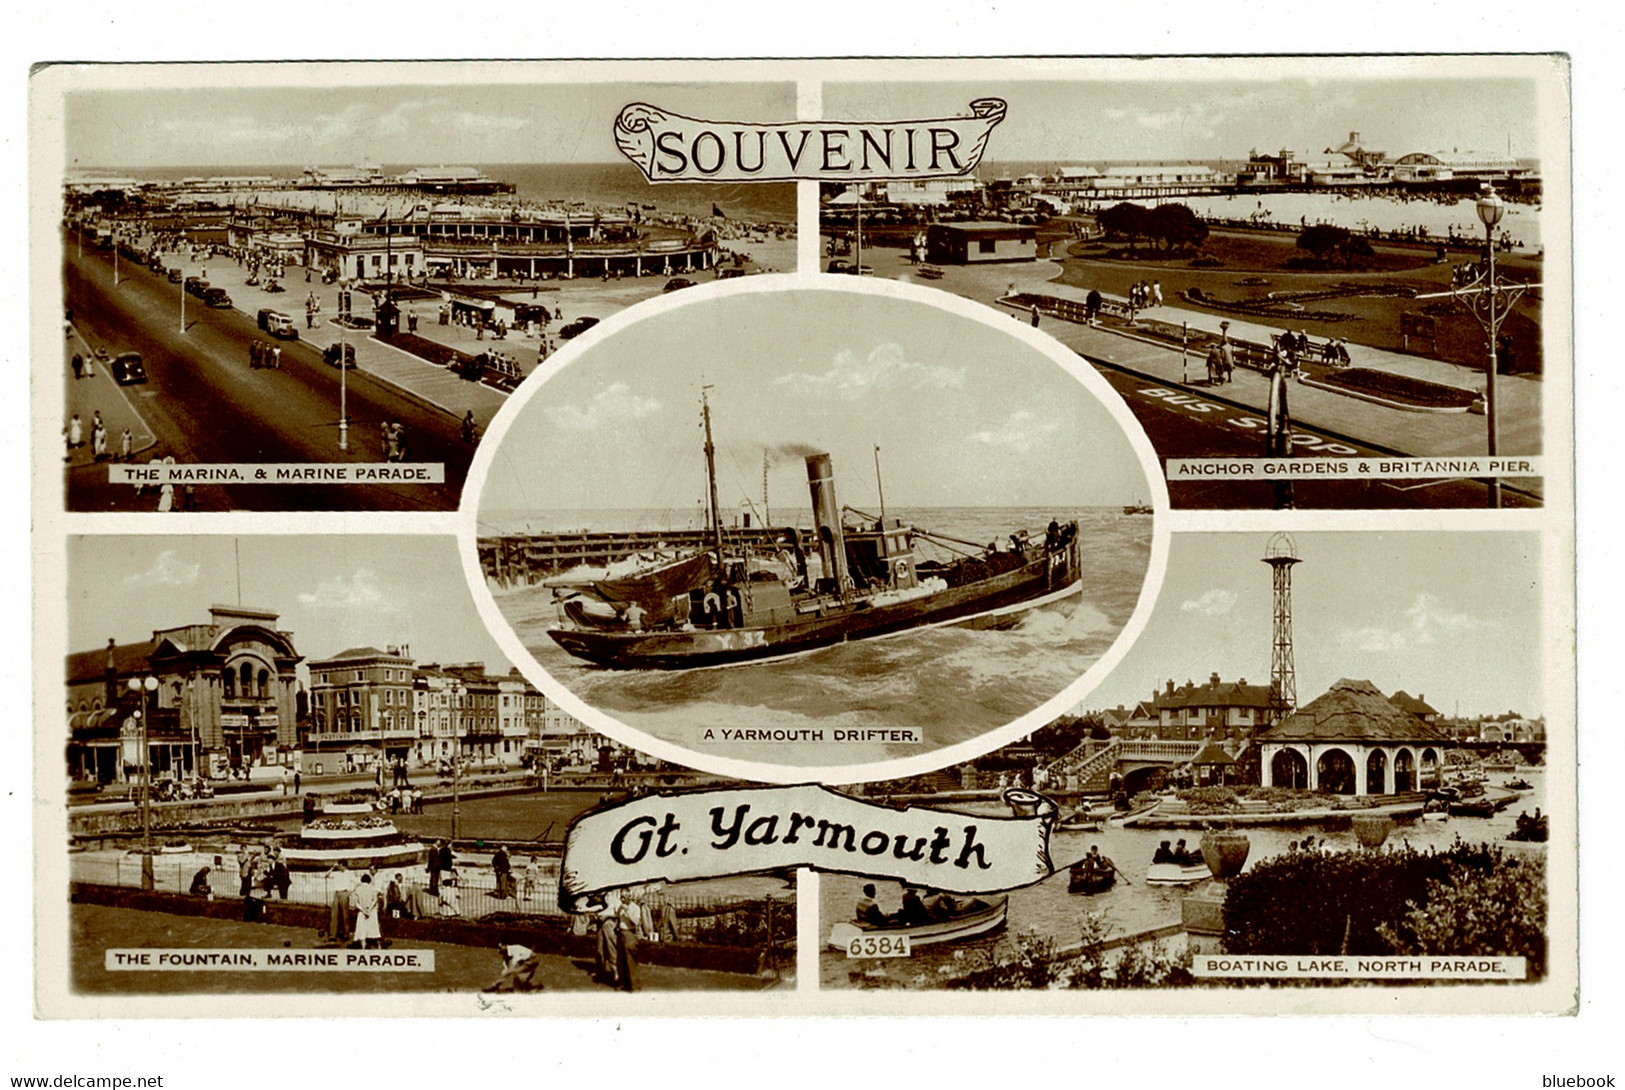 Ref BB 1450  - 1954 Real Photo Multivew Postcard - Great Yarmouth Fishing Drifter ++ Norfolk - Great Yarmouth